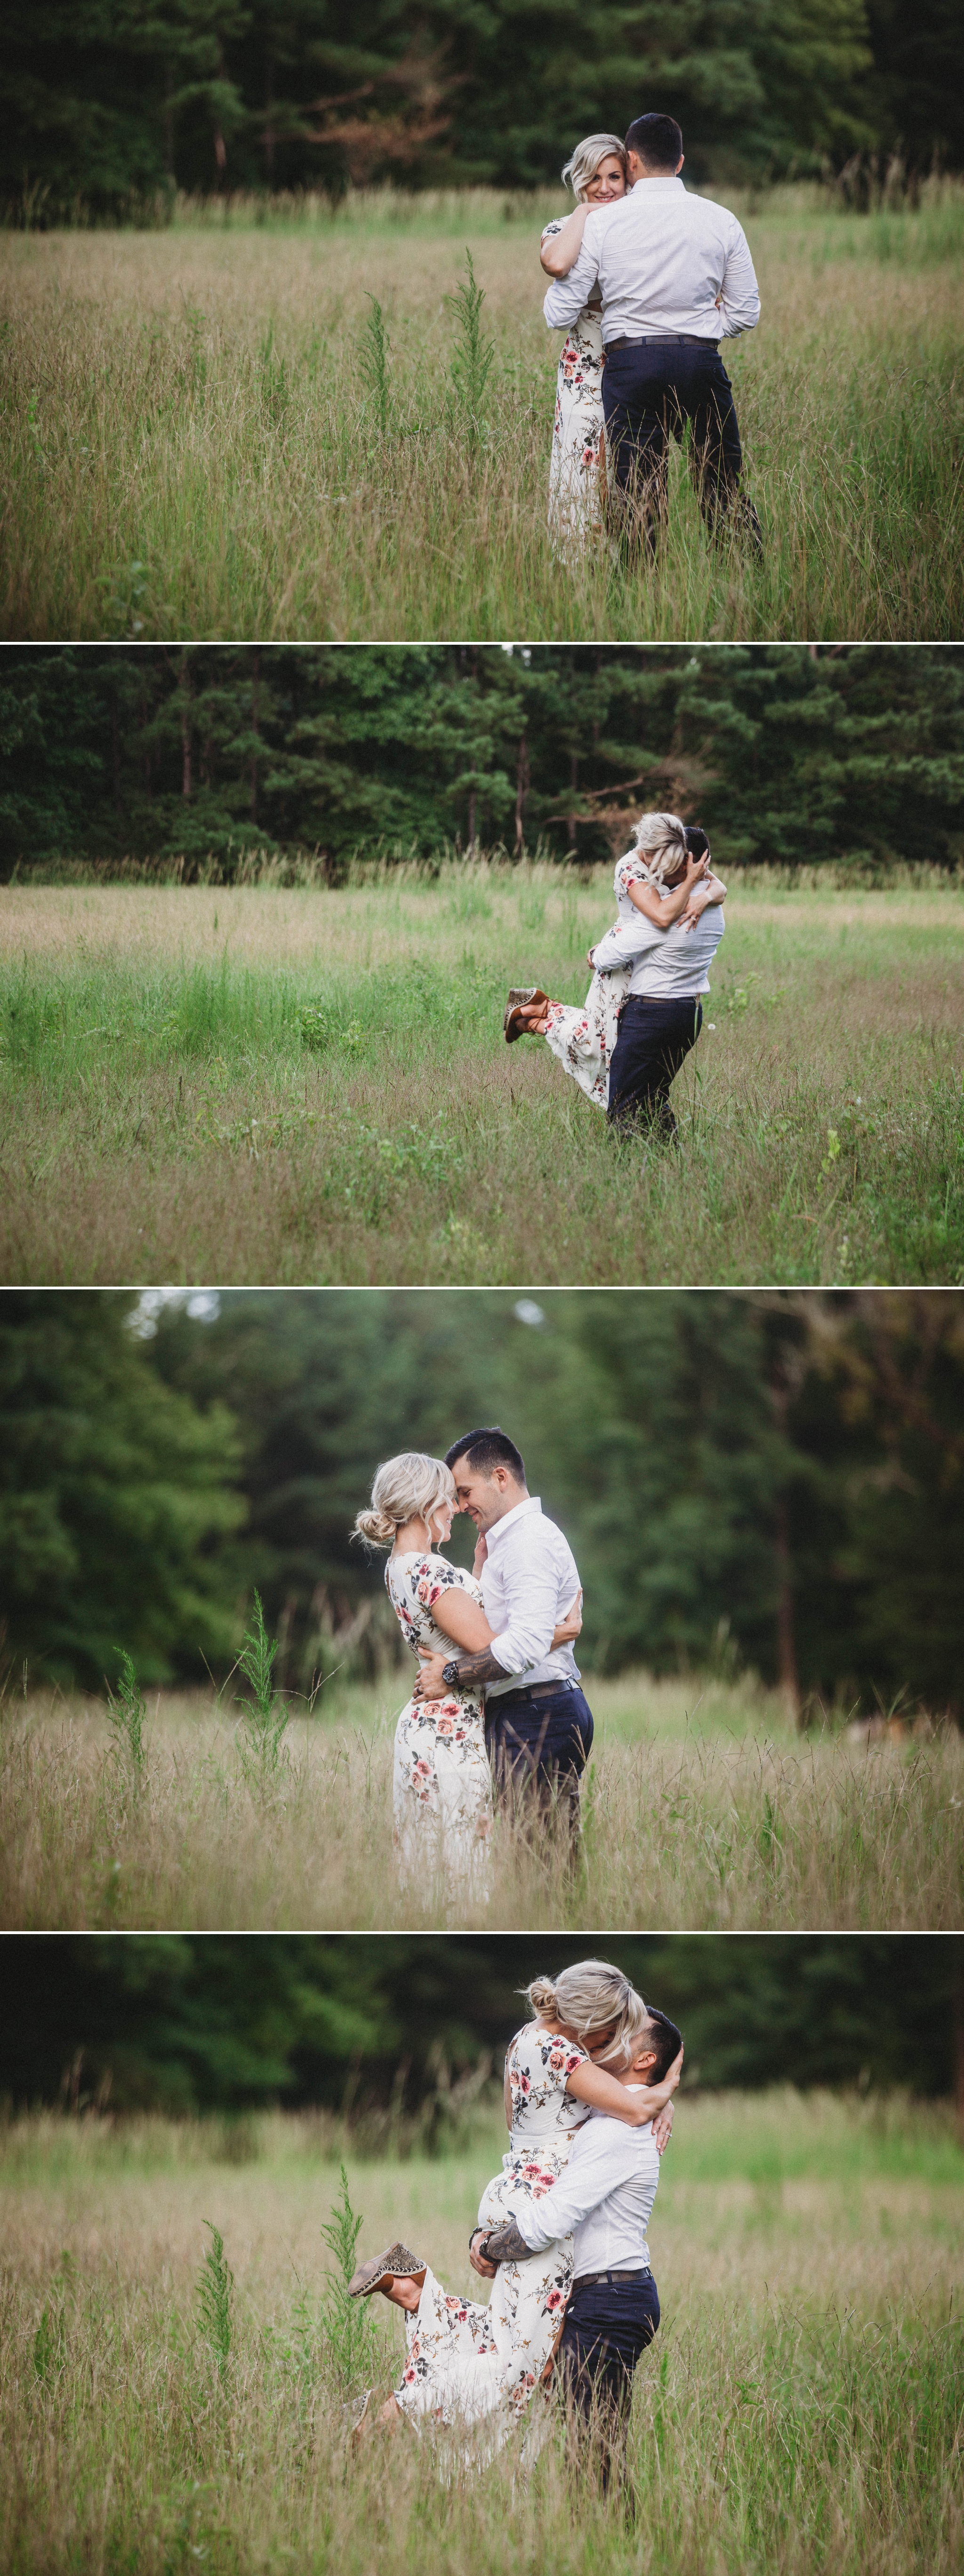 Cassie + Jesse - Engagement Photography Session in a field - Fayetteville North Carolina Wedding Photographer 5.jpg